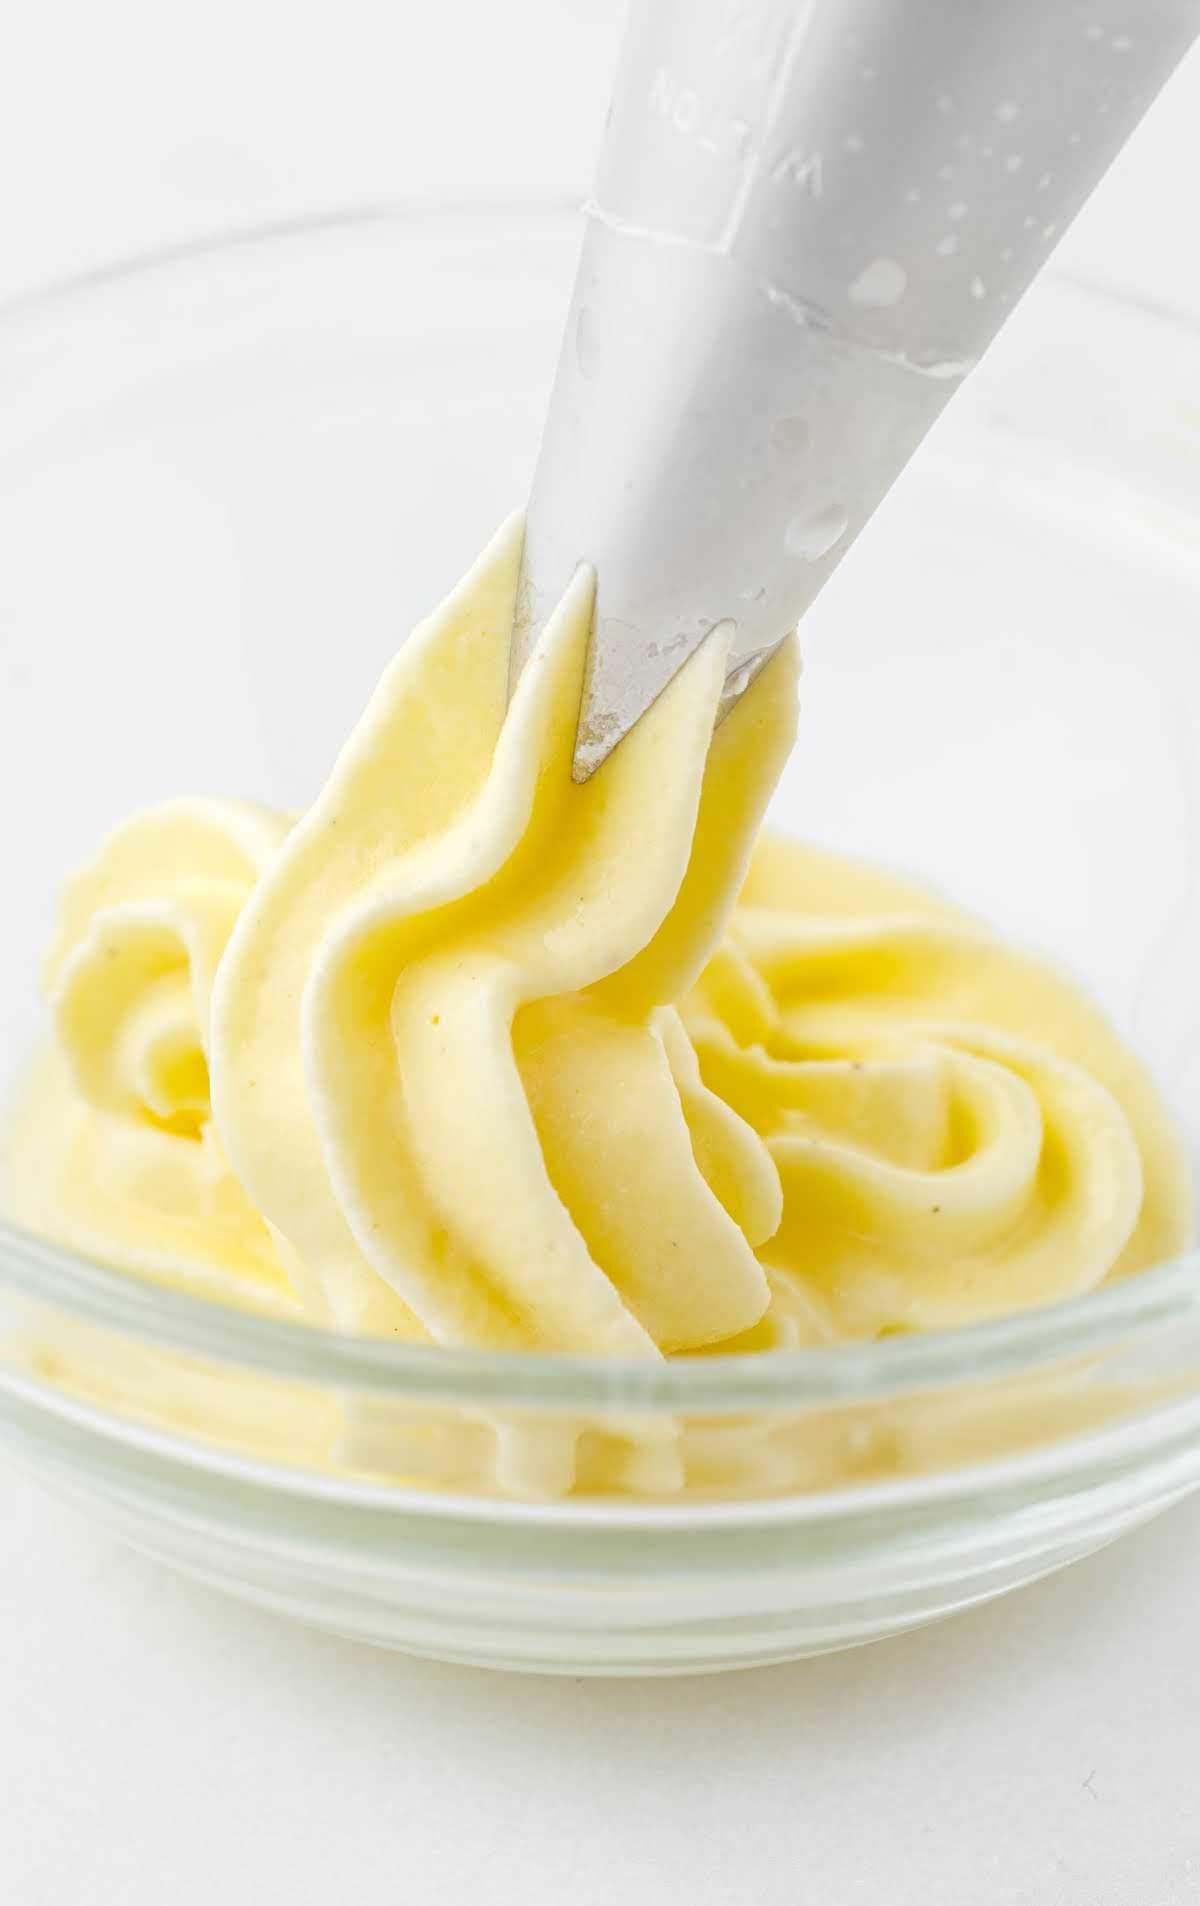 Dole Whip piped into a in a small clear bowl